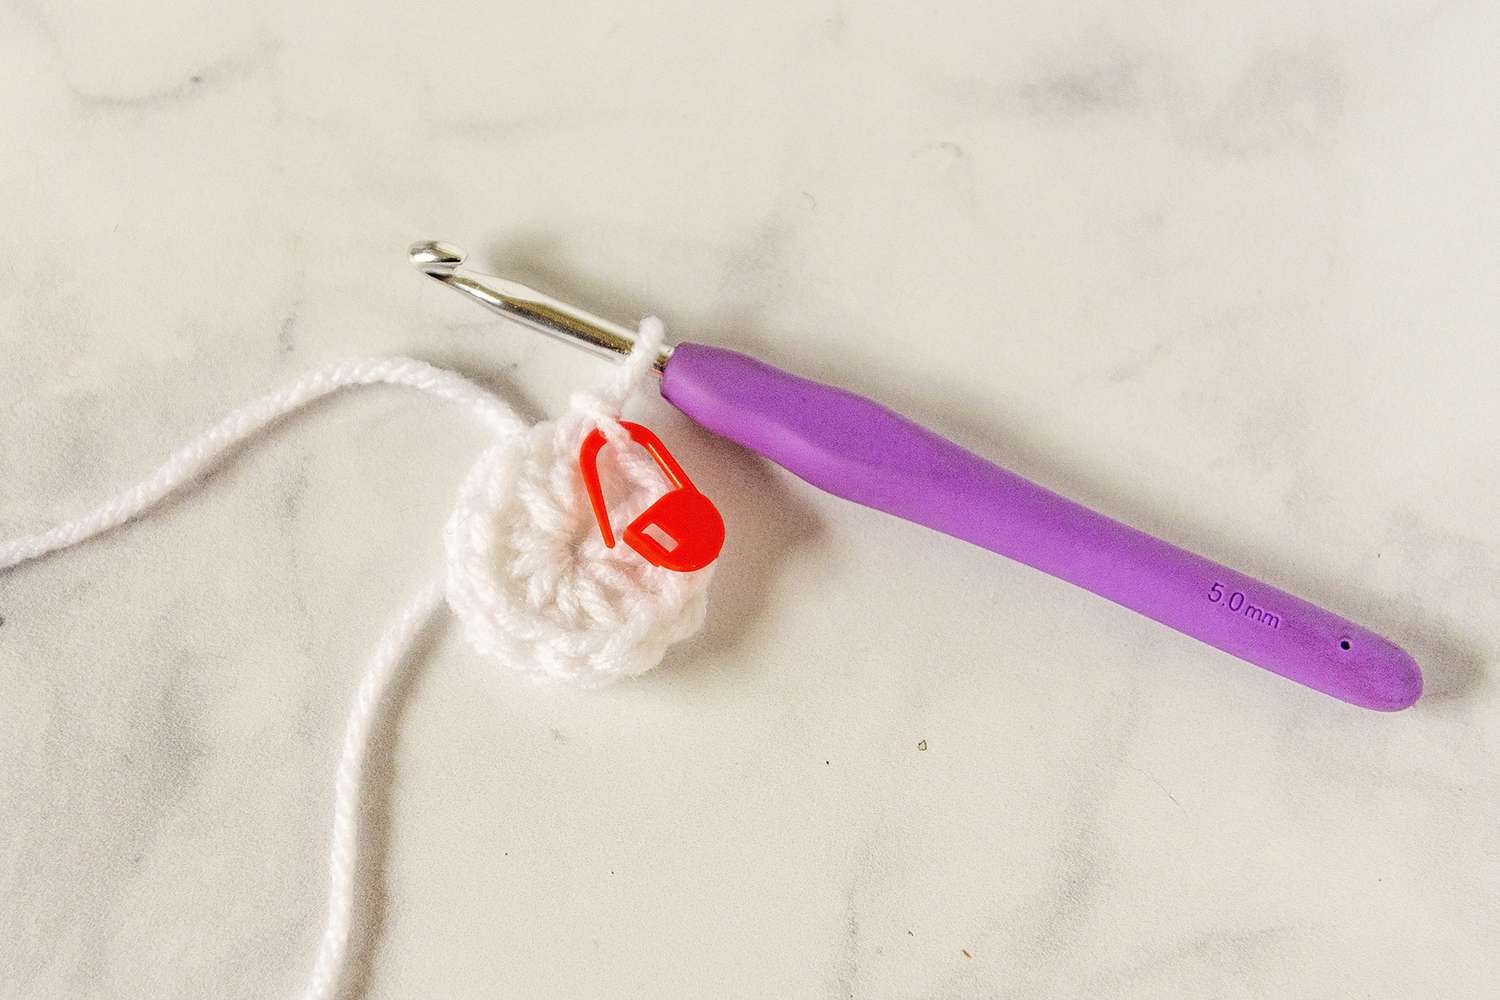 Crochet circle with red stitch marker and crochet hook.